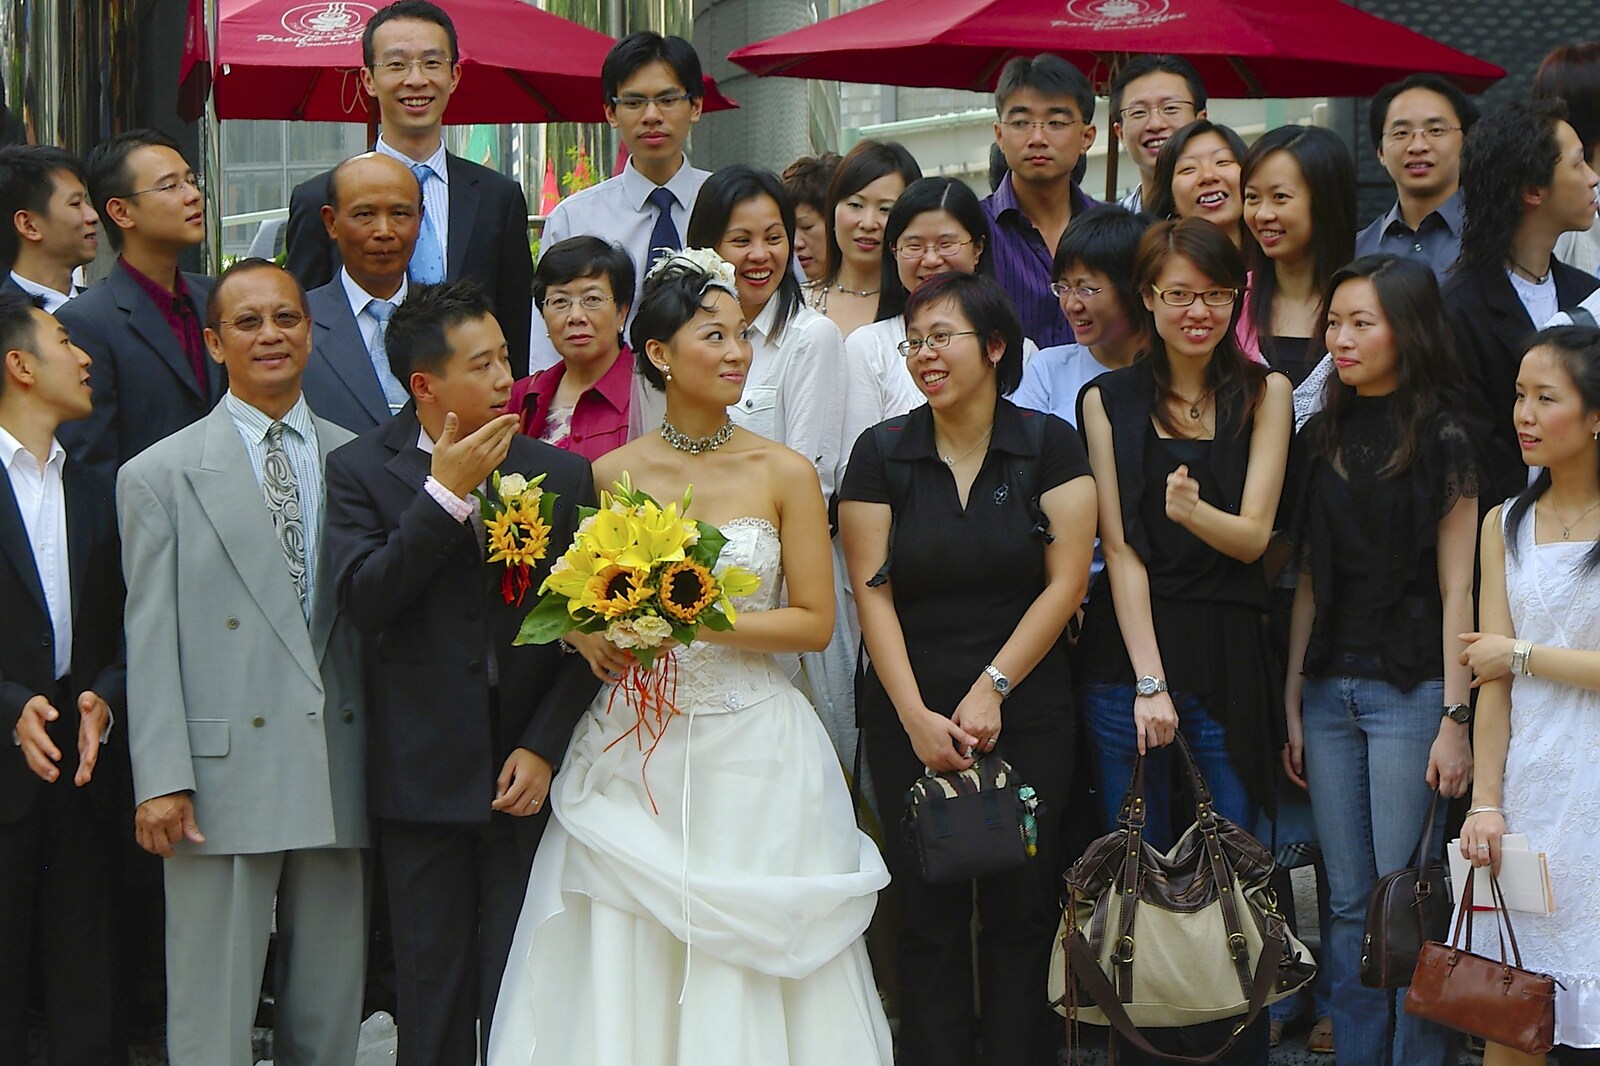 A wedding takes places on Garden Road from Wan Chai and Central, Hong Kong, China - 2nd October 2006